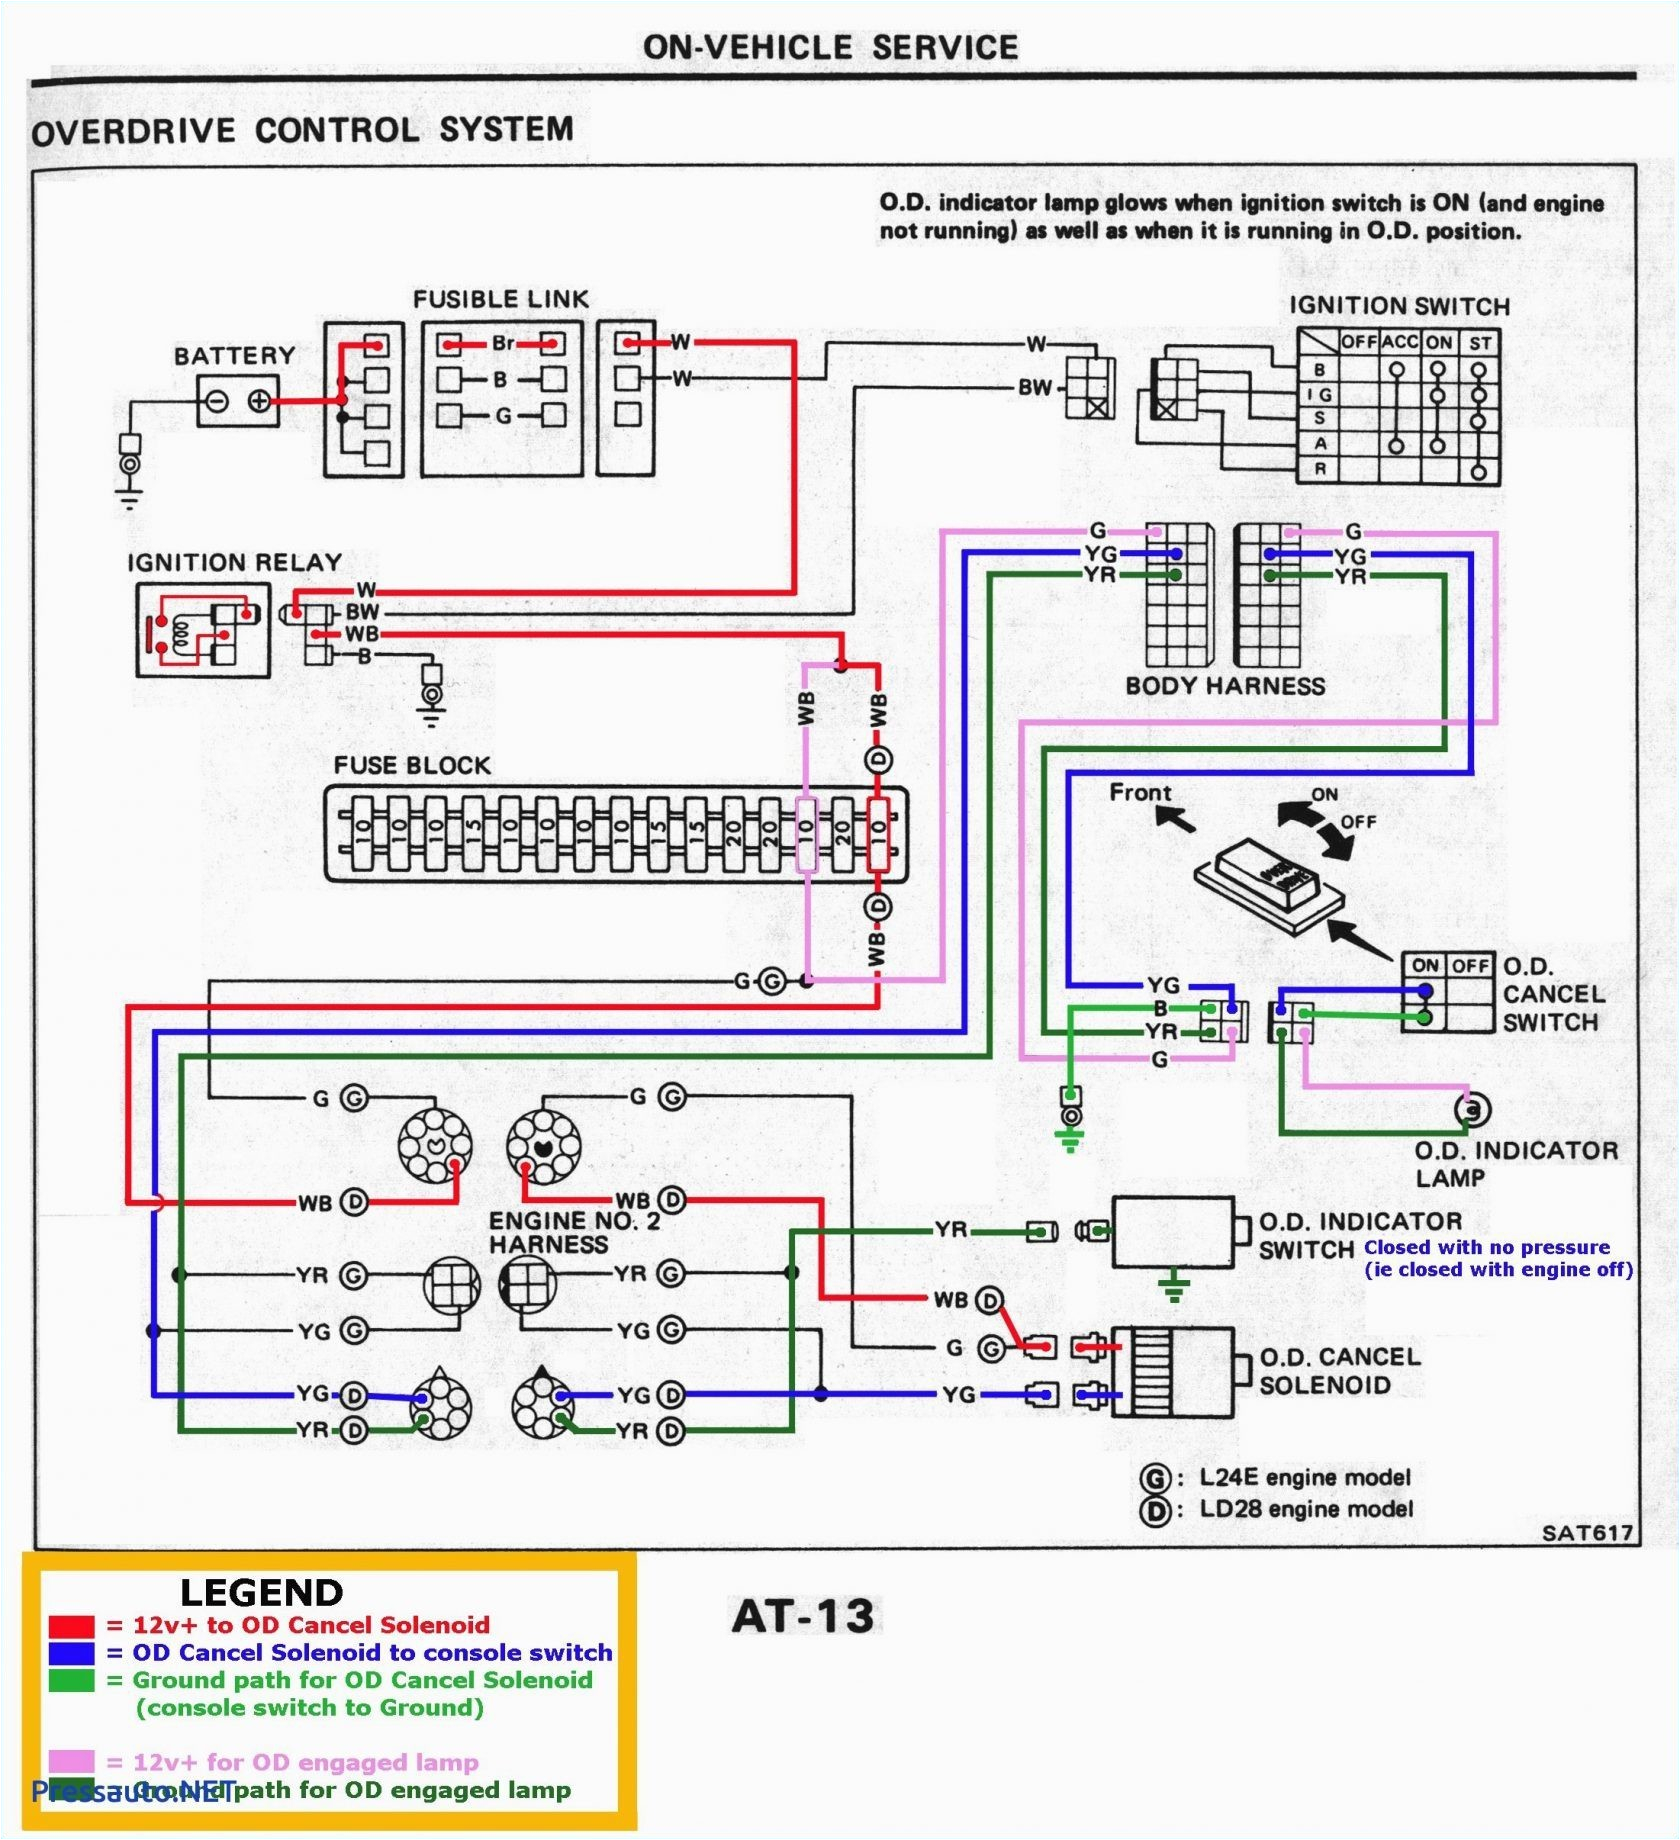 connection diagram olympian generator wiring diagram megaolympian d20p1 generator wiring schematic wiring diagram connection diagram olympian